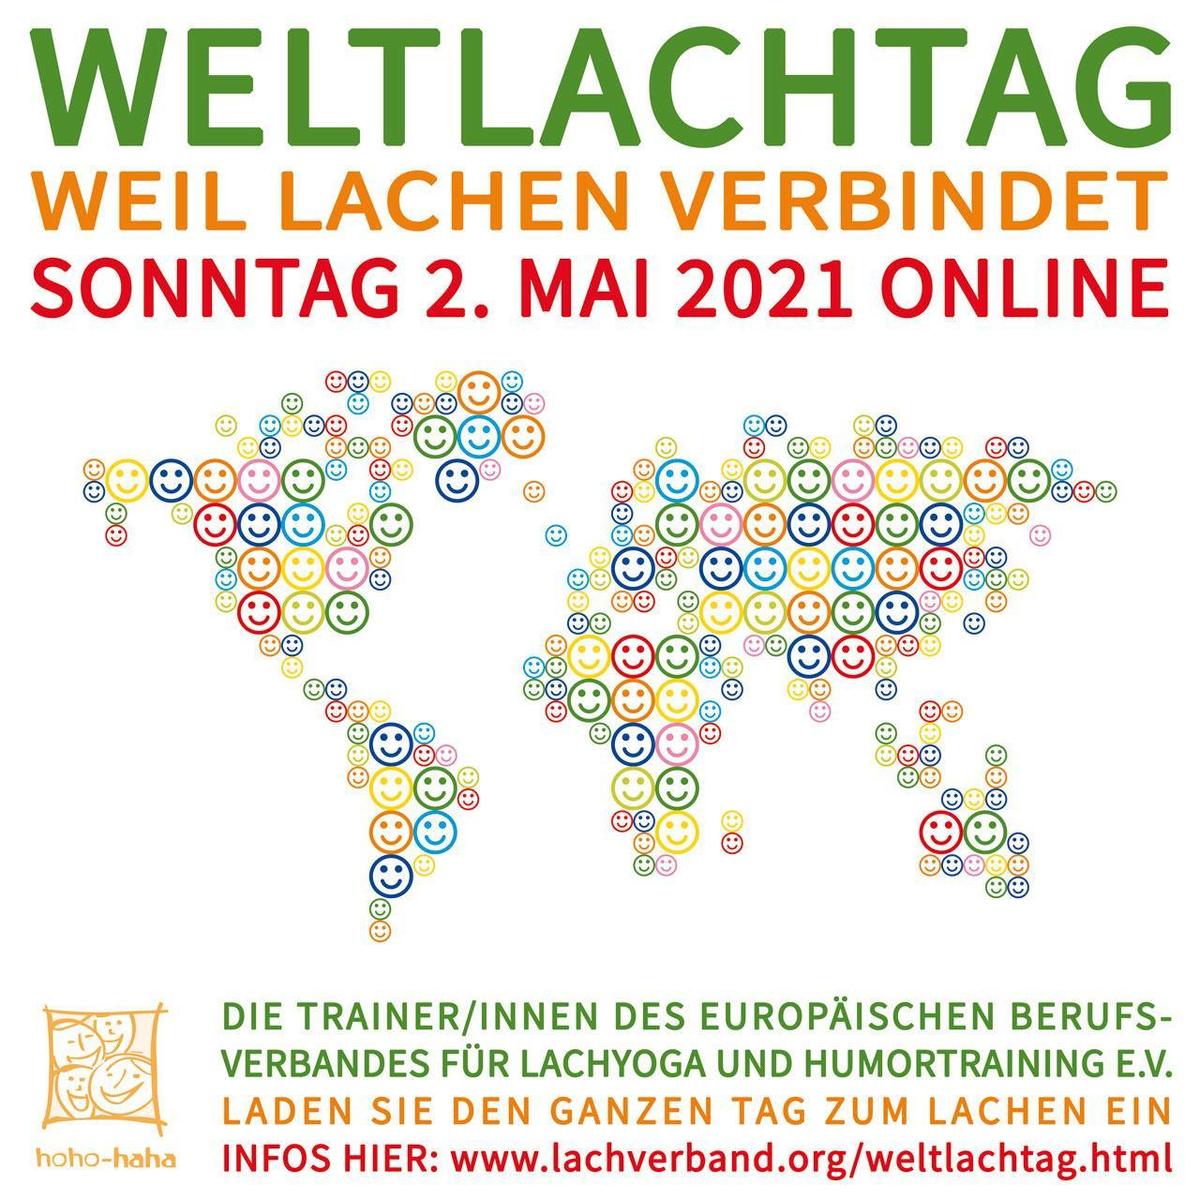 weltlachtag 2021